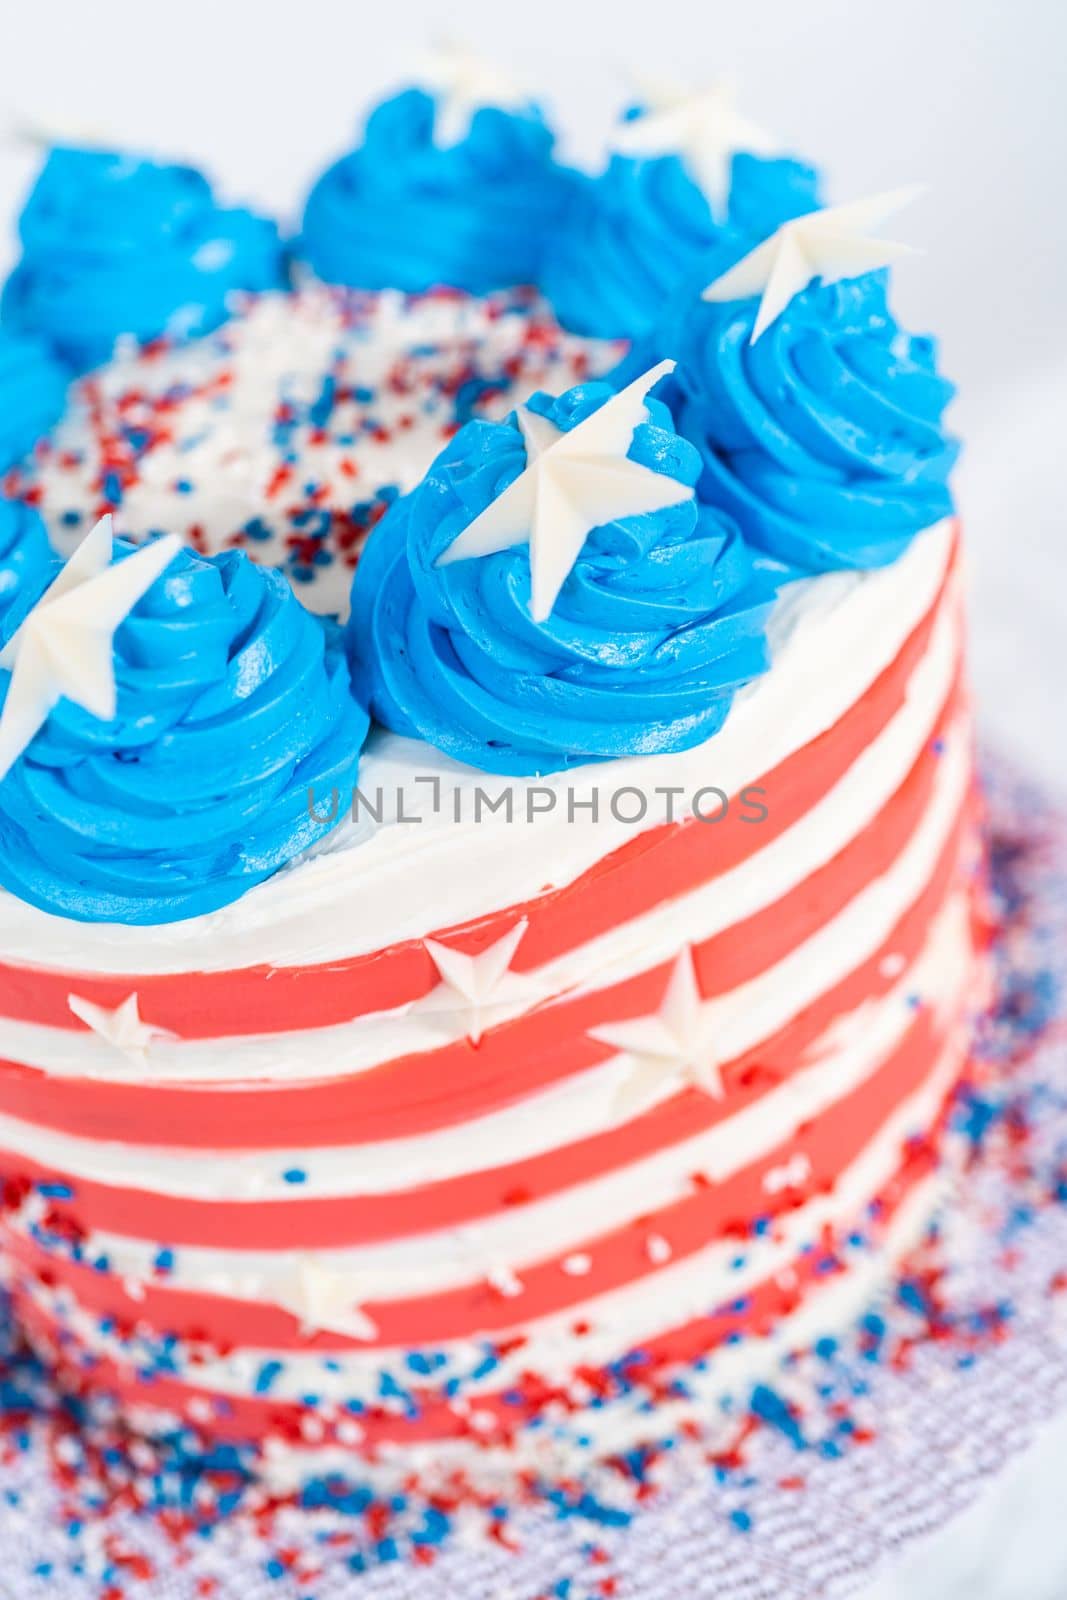 4th of July chocolate cake by arinahabich